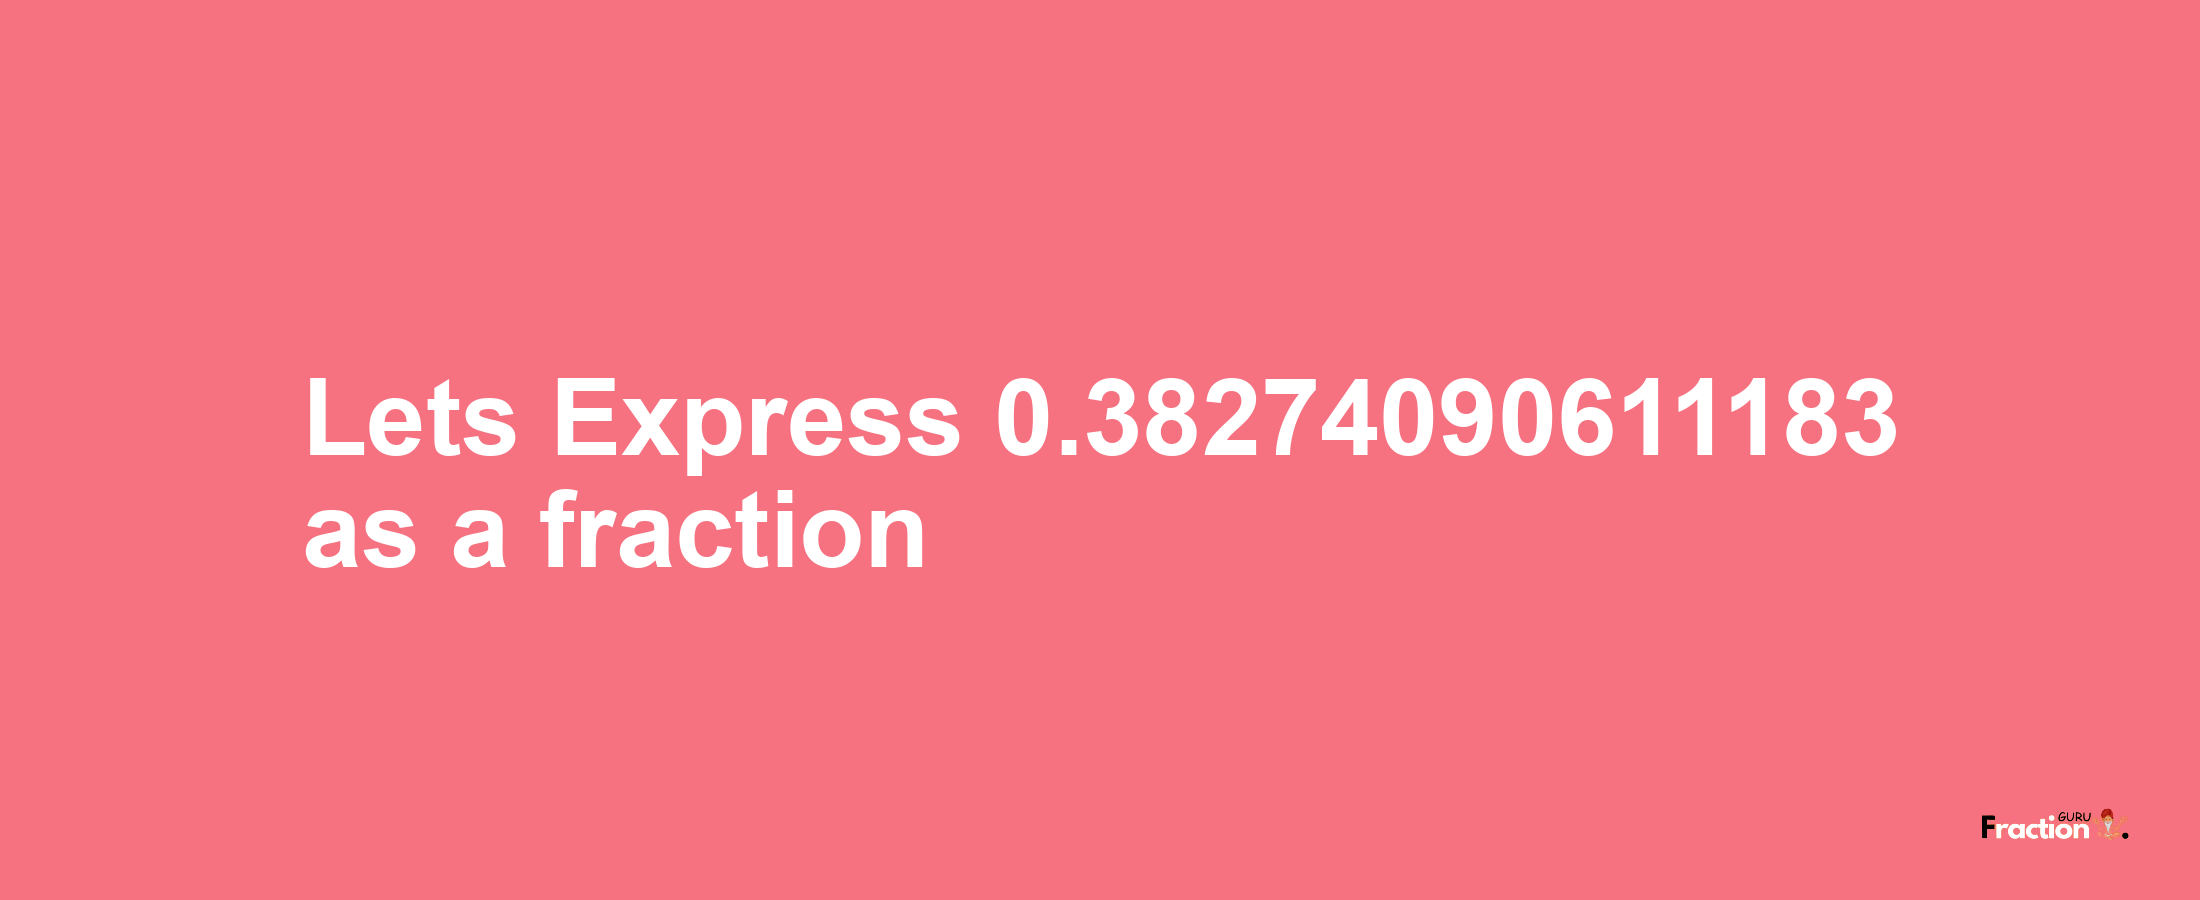 Lets Express 0.38274090611183 as afraction